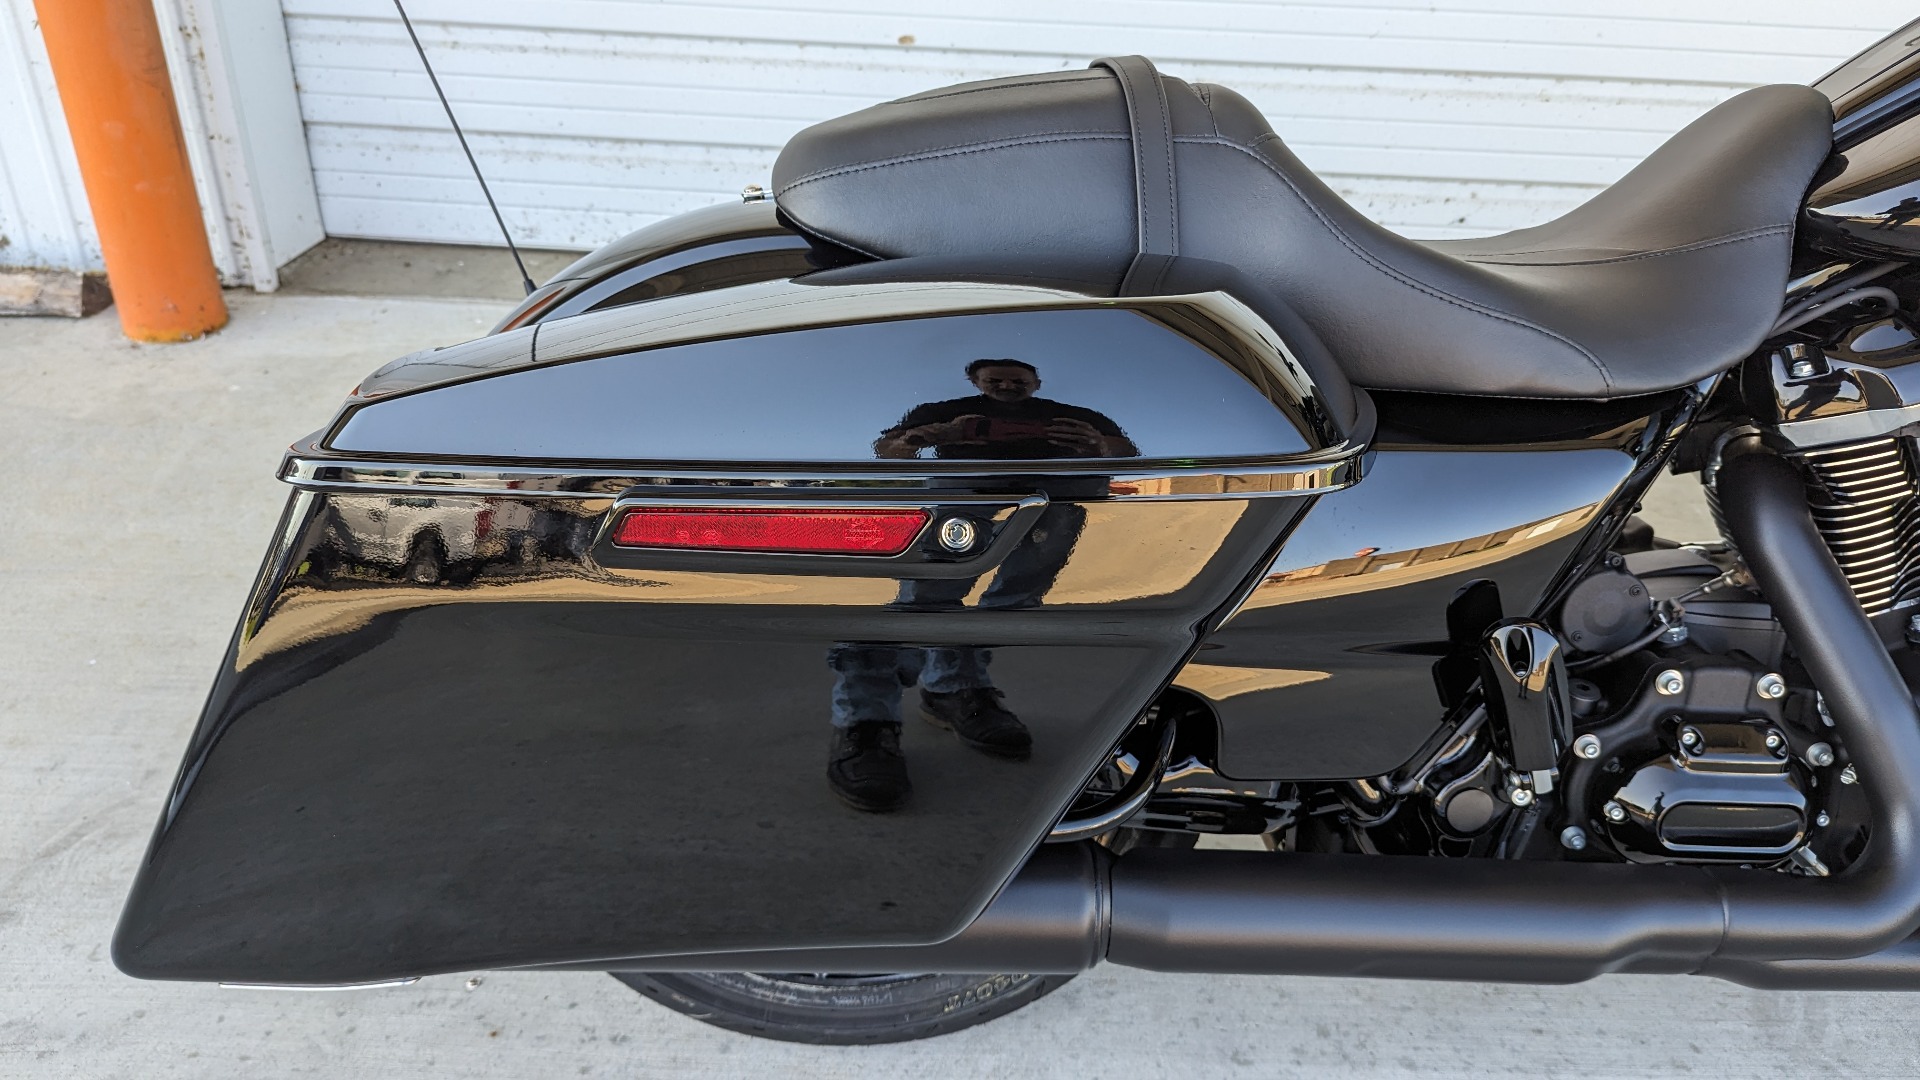 2023 harley davidson road glide special black edition for sale in little rock - Photo 5